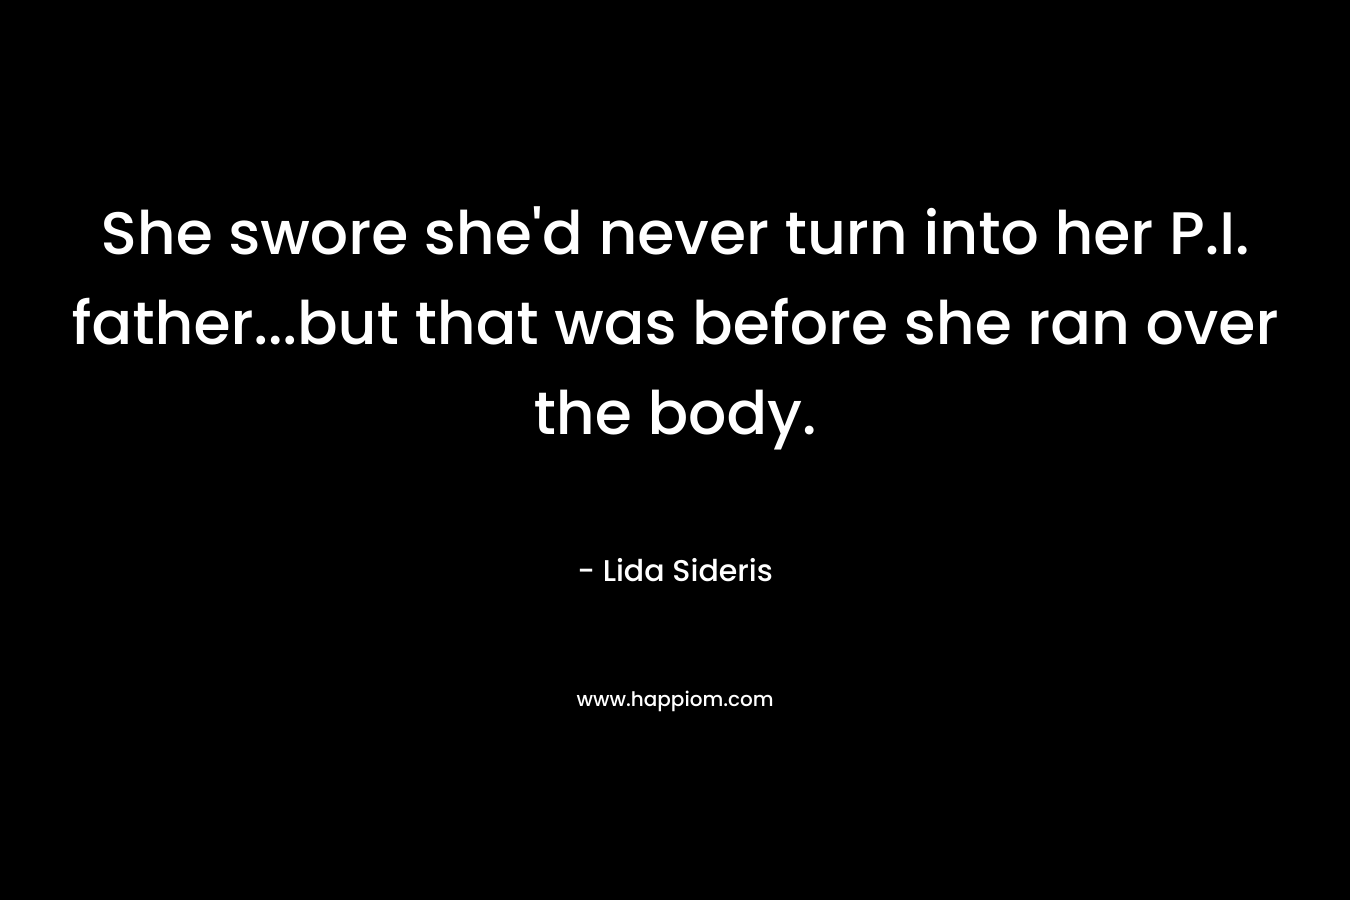 She swore she’d never turn into her P.I. father…but that was before she ran over the body. – Lida Sideris